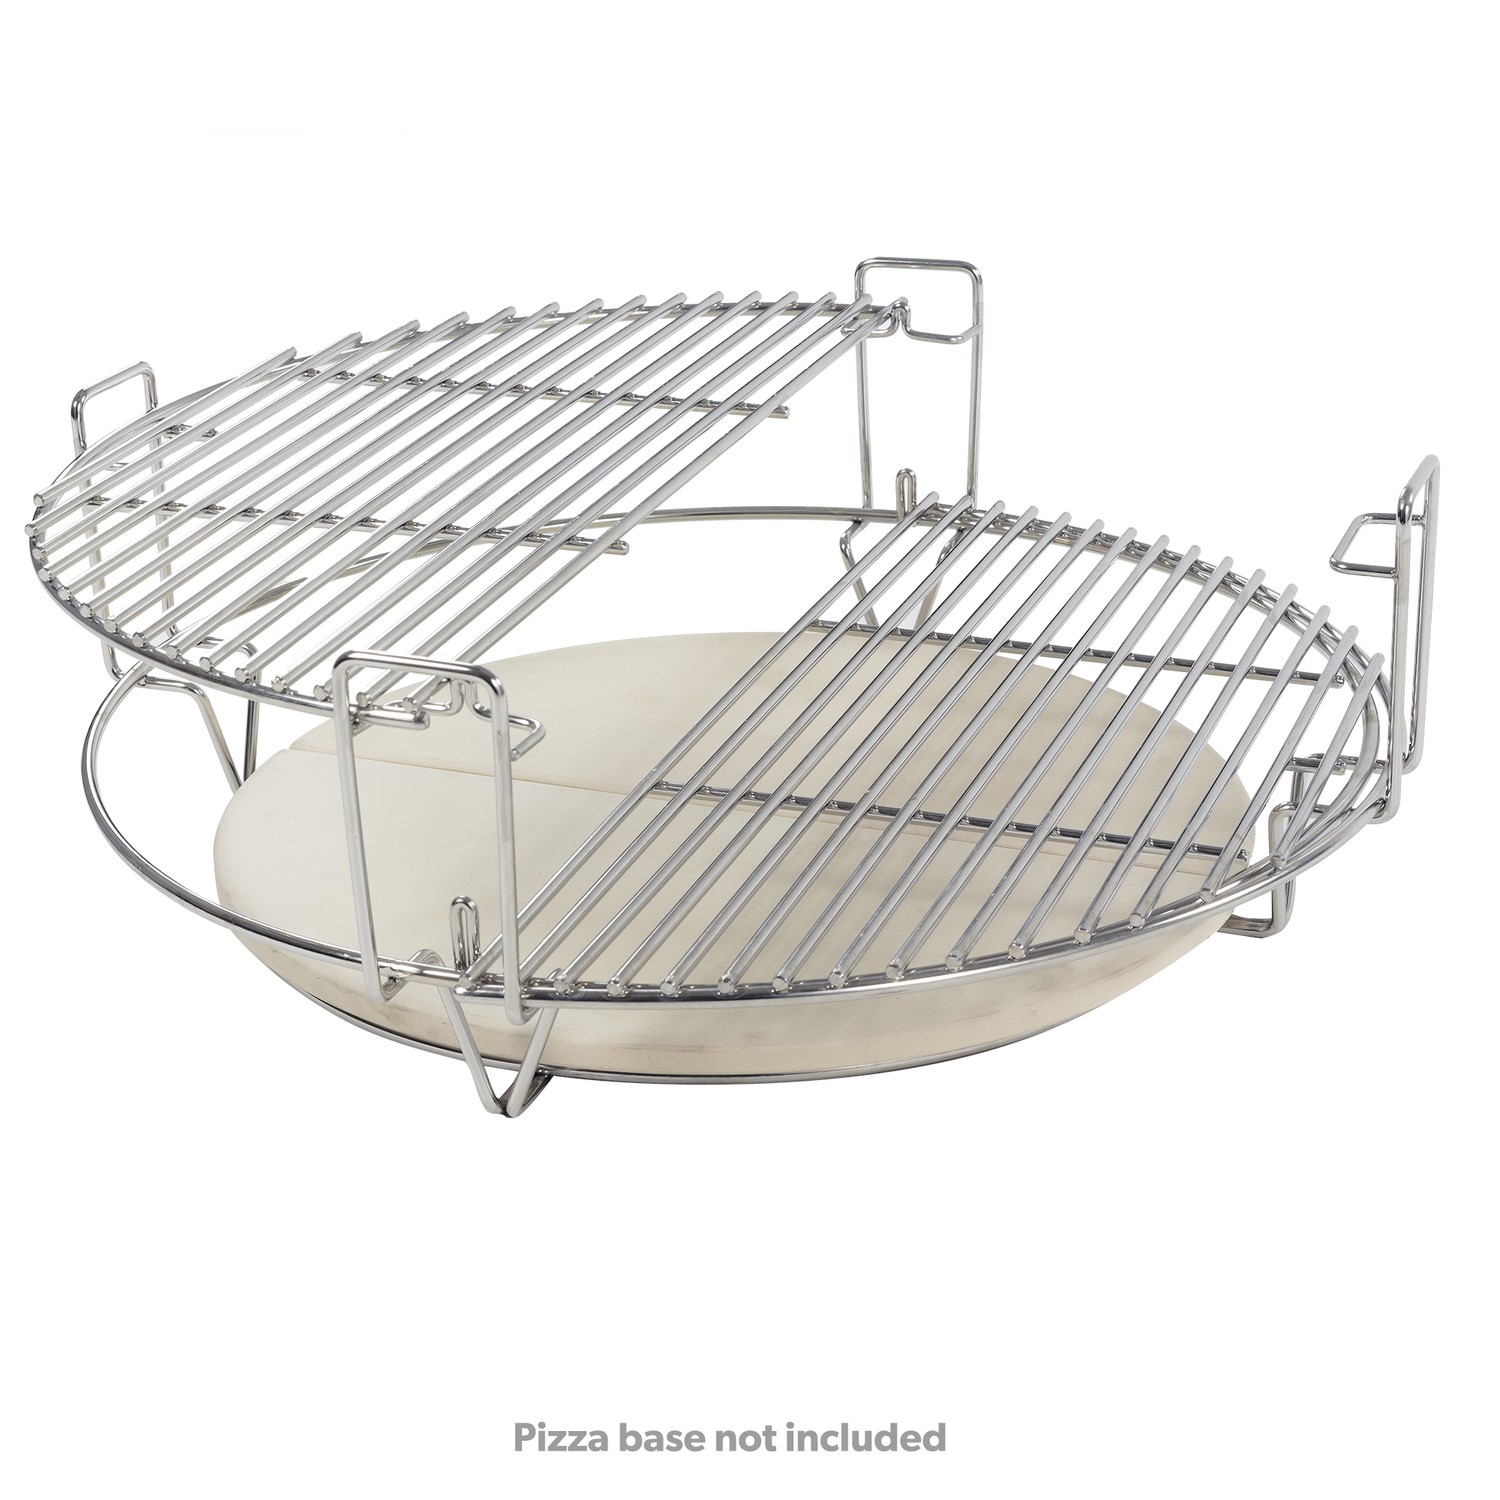 Boss Grill 3 Layer Cooking Grid for 22 Kamado Egg BBQ